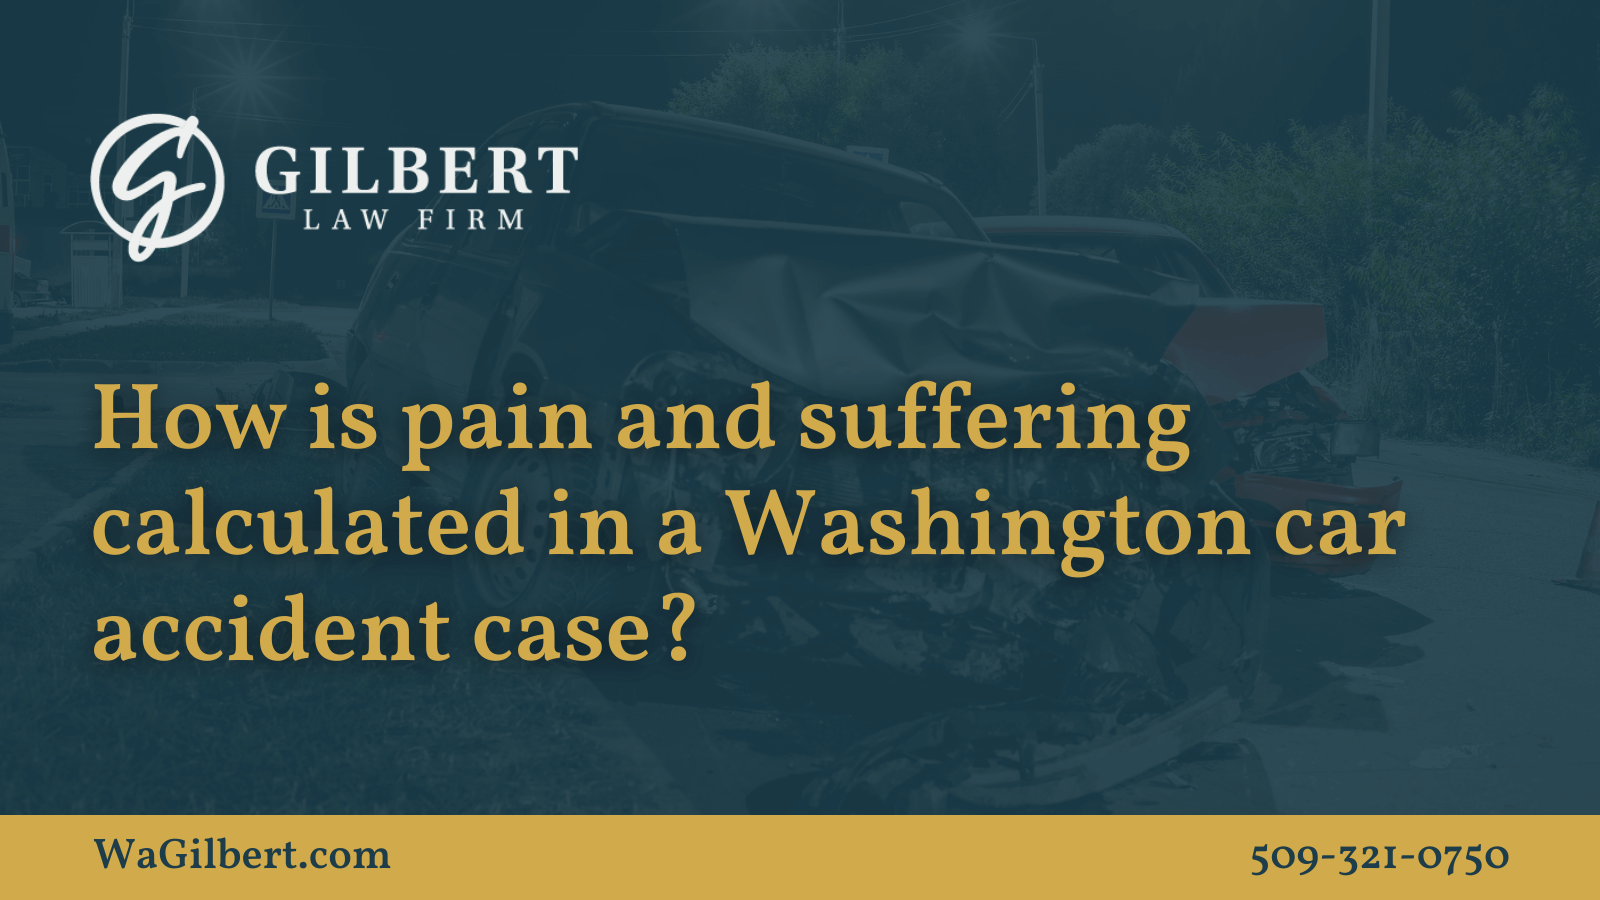 how is pain and suffering calculated in washington - bill gilbert accident attorney spokane washington